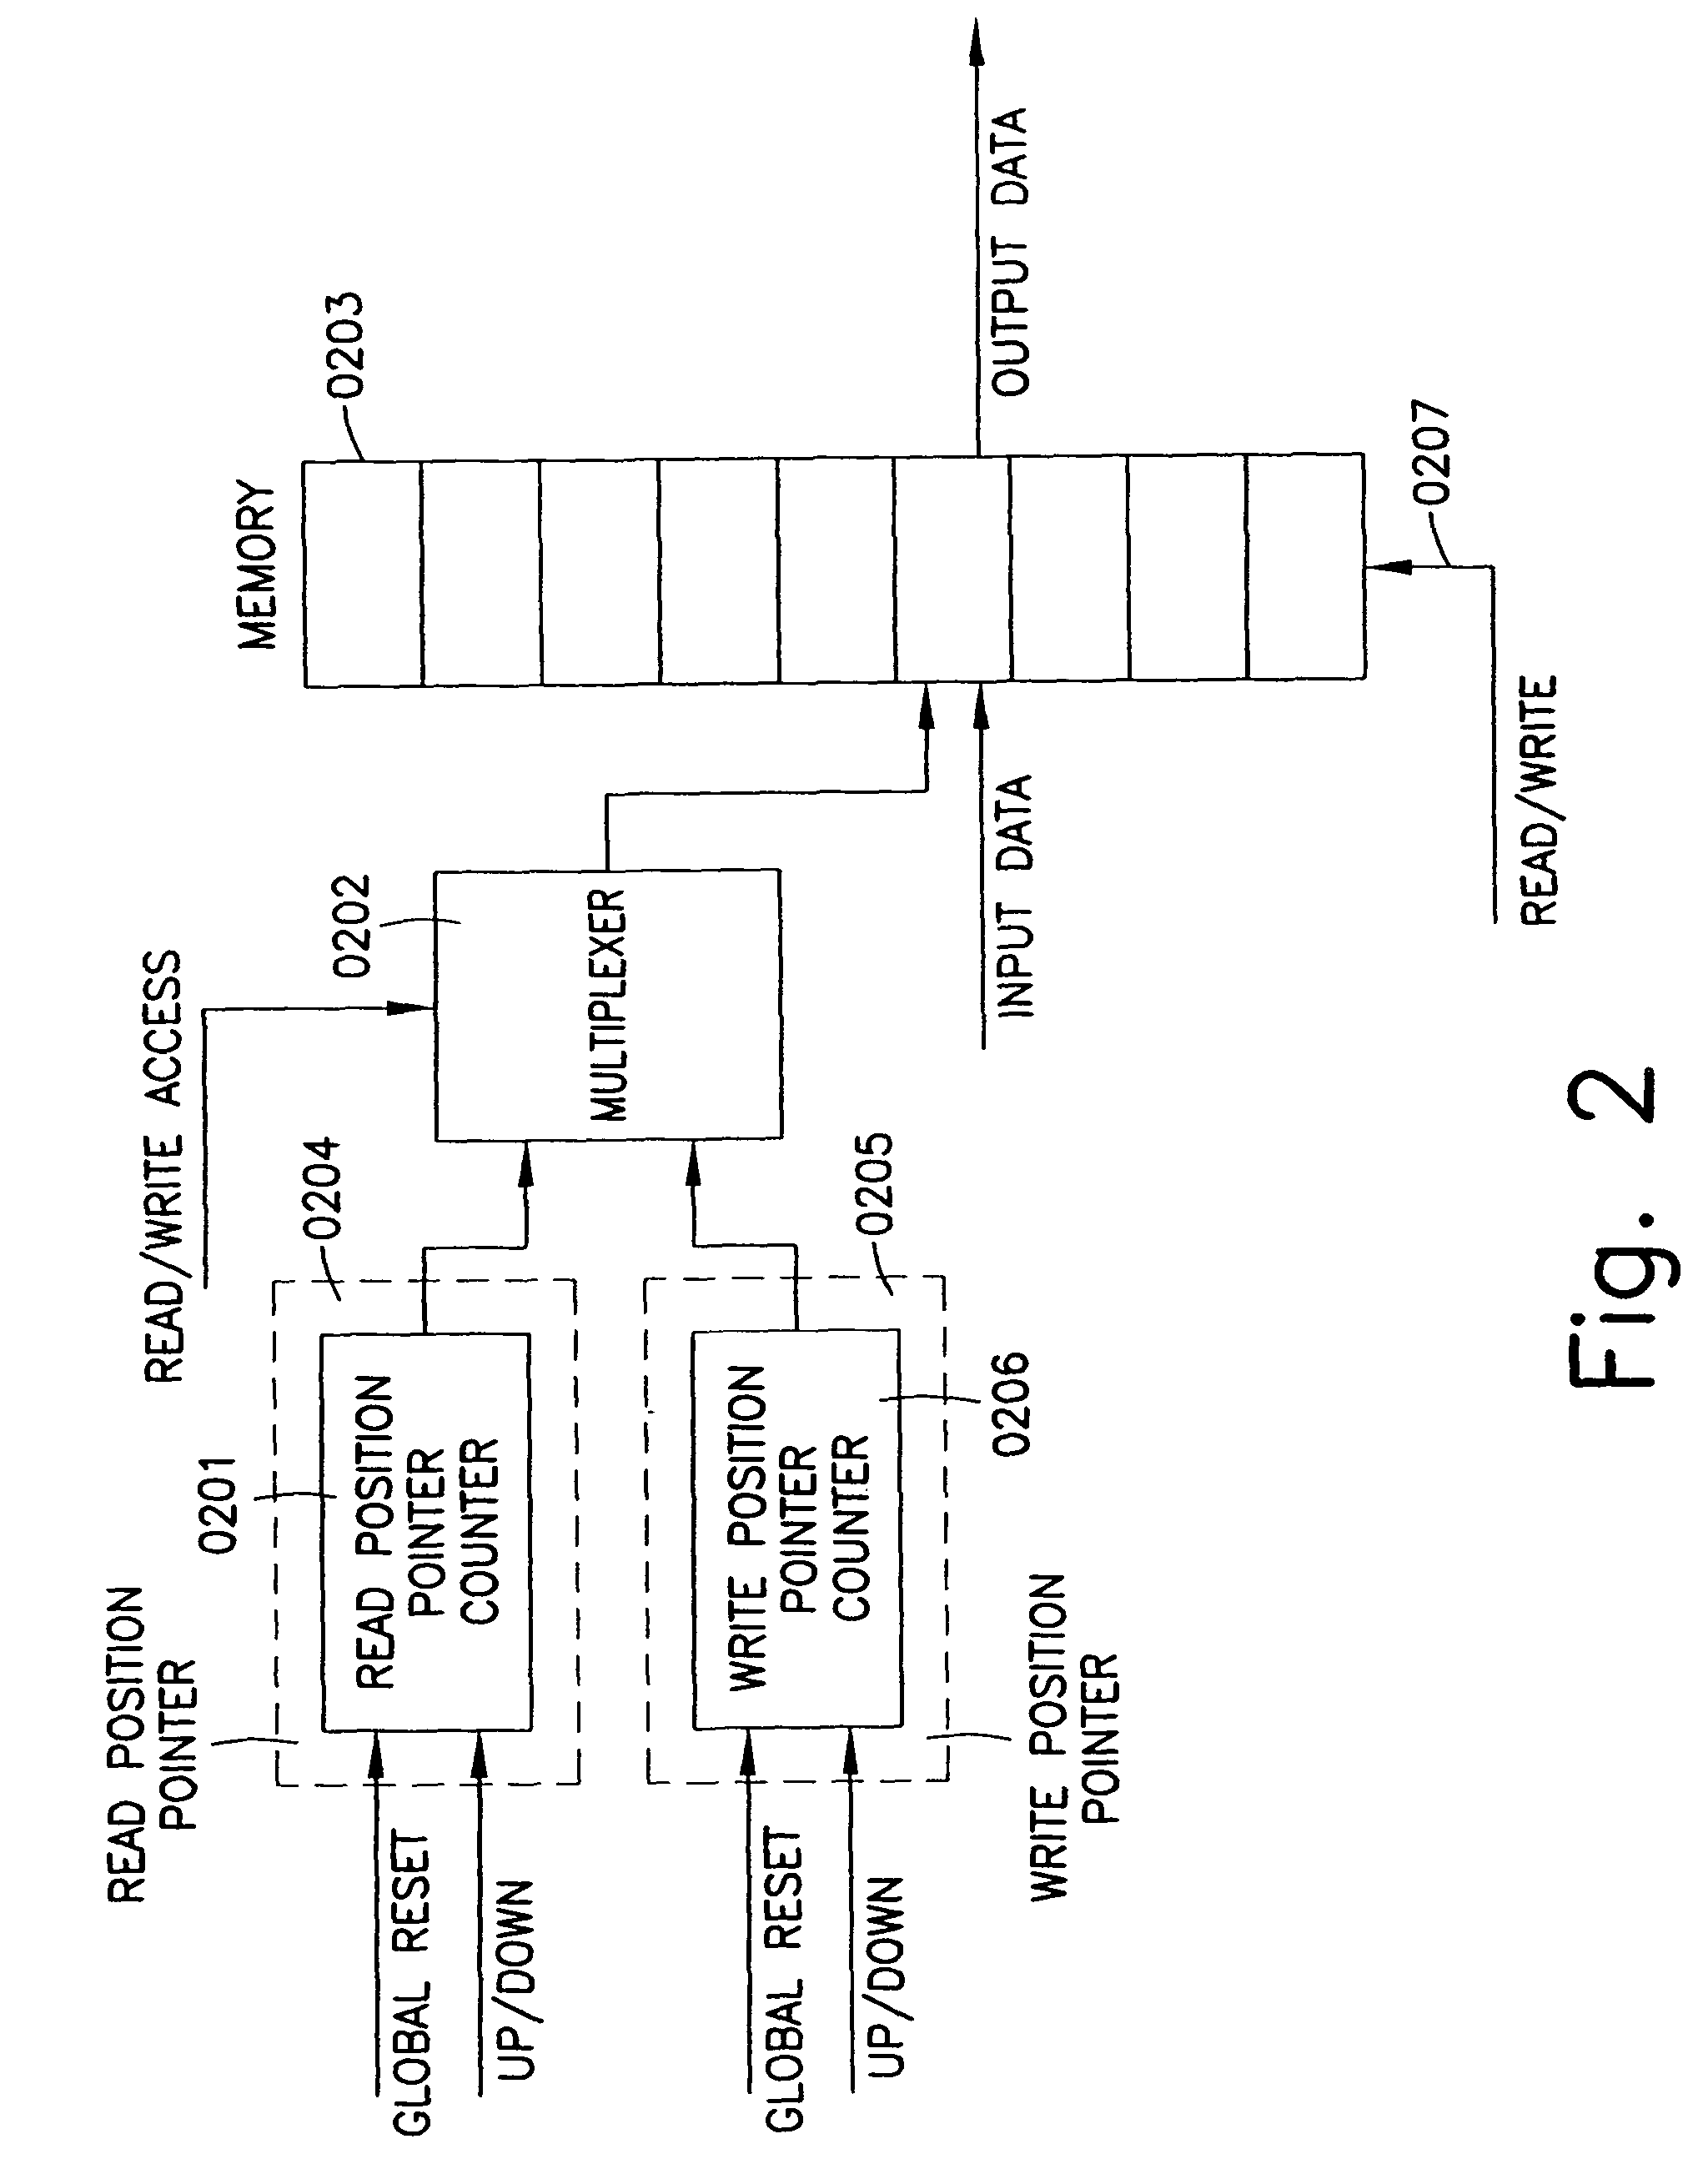 Process for automatic dynamic reloading of data flow processors (DFPs) and units with two- or three-dimensional programmable cell architectures (FPGAs, DPGAs, and the like)